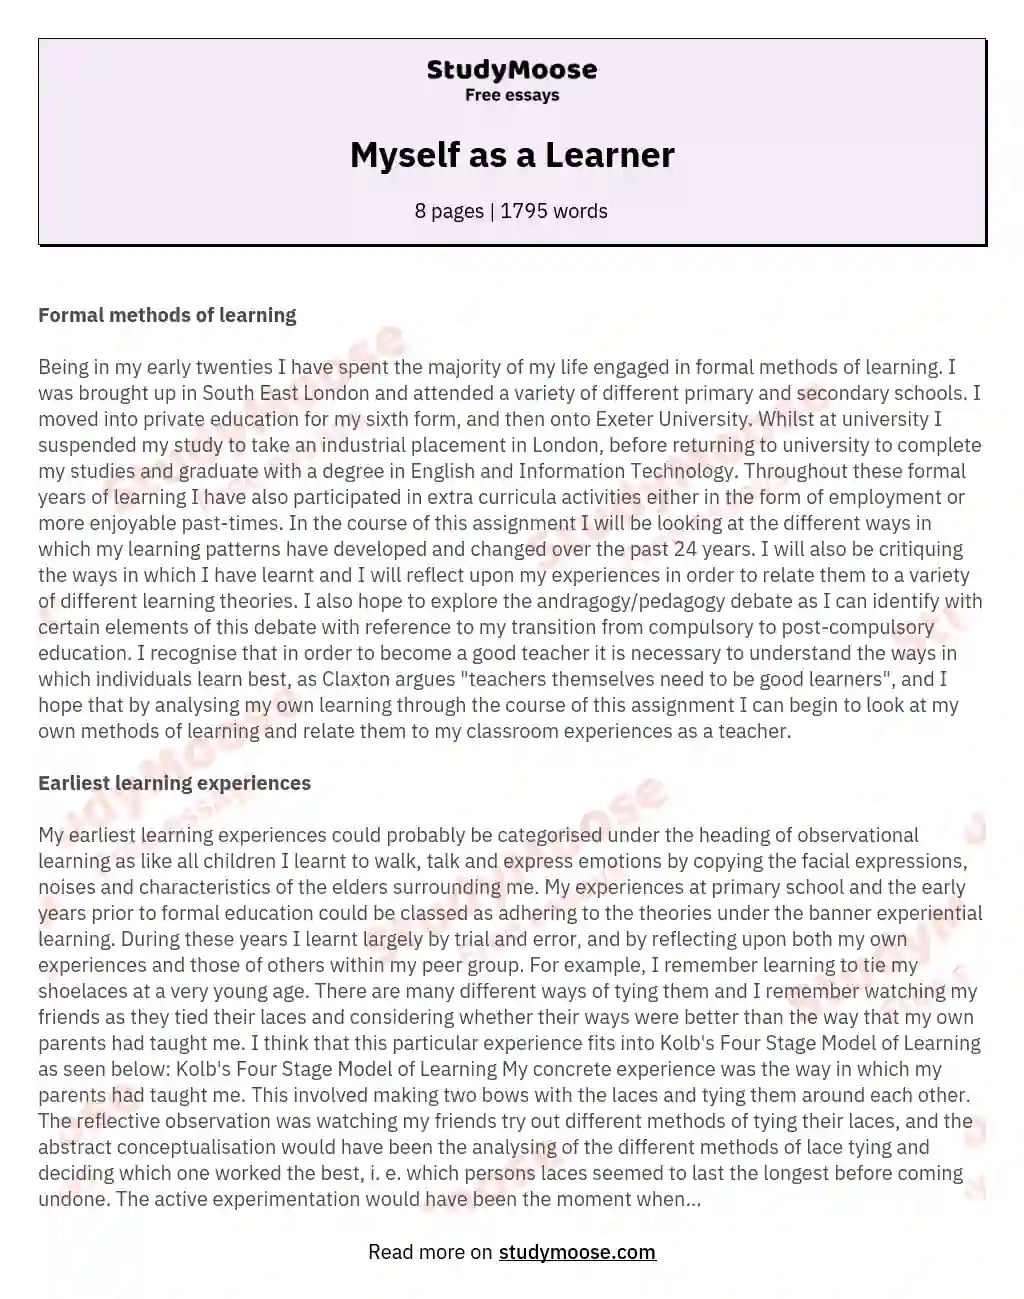 Formal Methods of Learning: An Exploration of Learning Styles essay